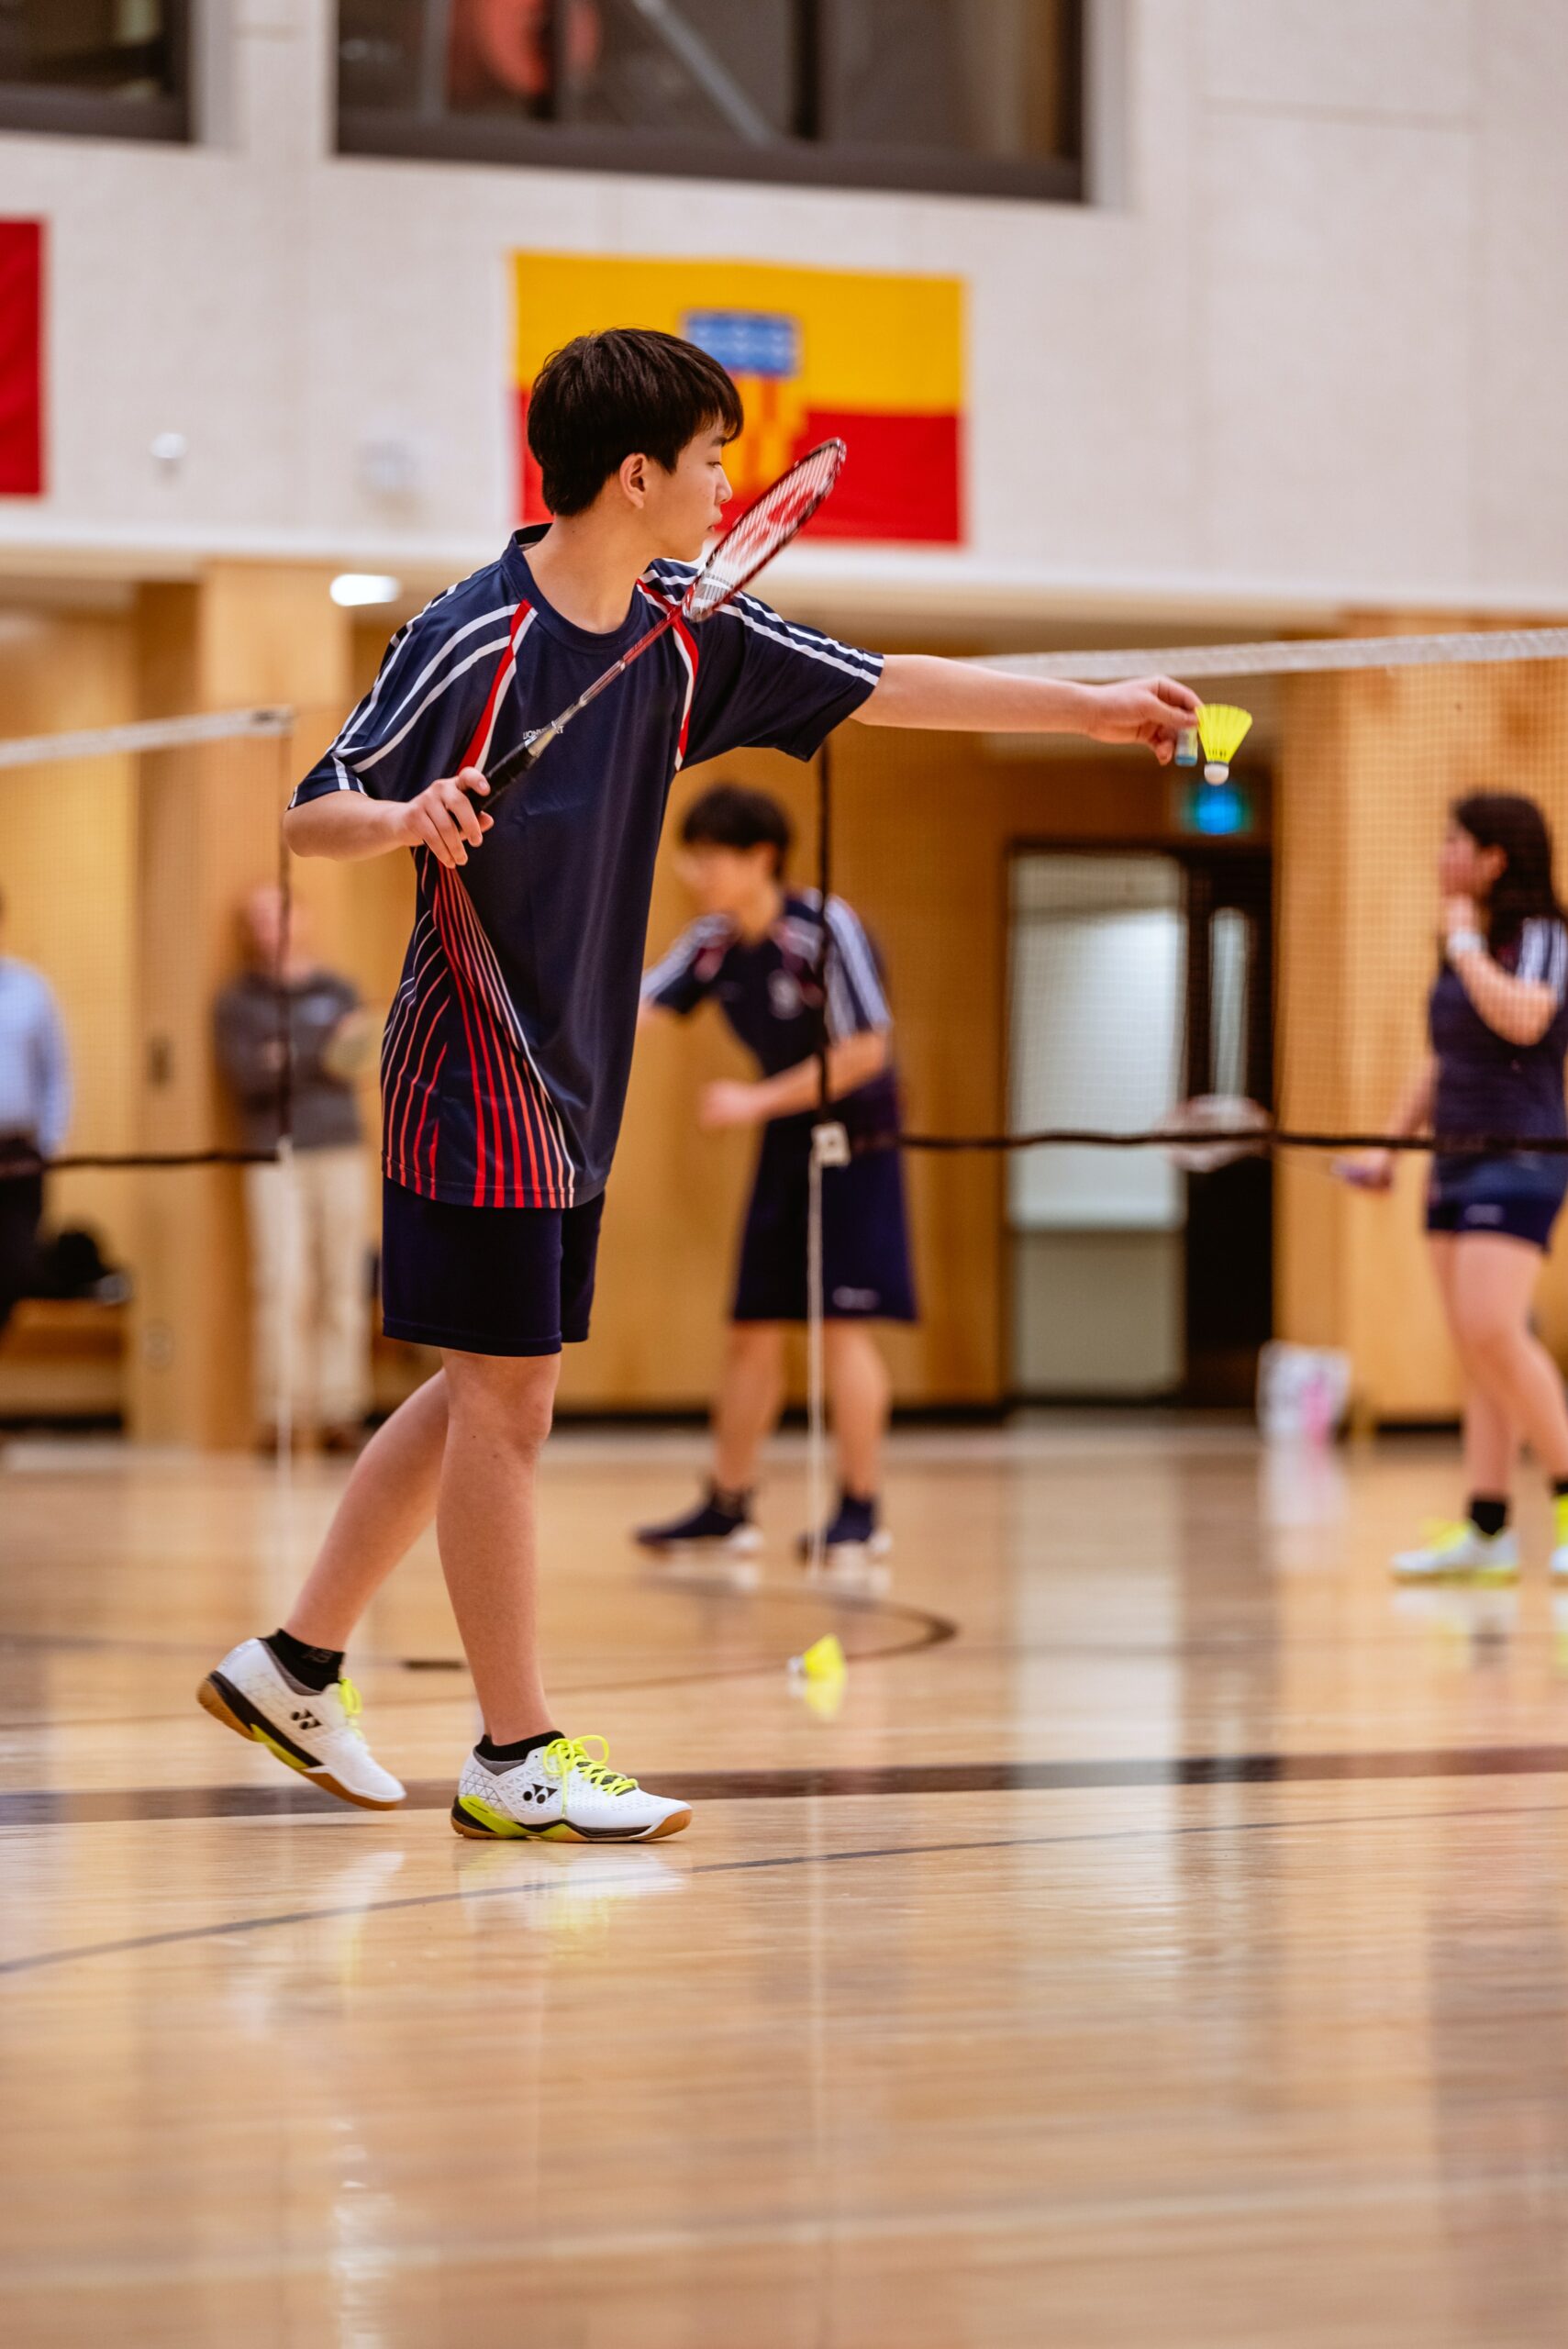 A student plays badminton in gym class